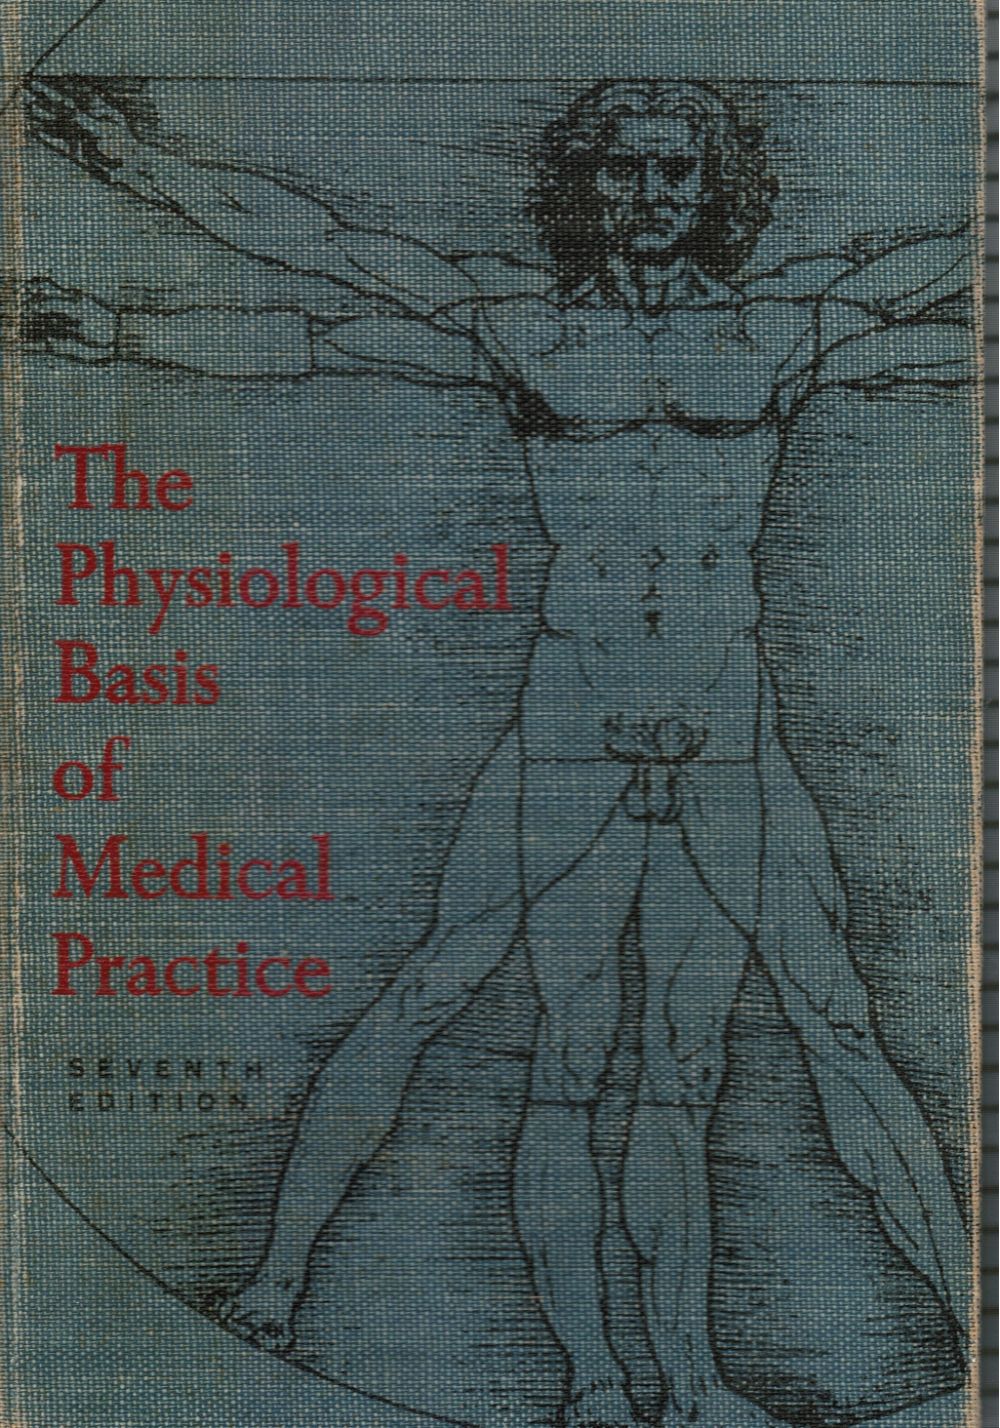 BEST, CHARLES HERBERT; NORMAN BURKE TAYLOR - The Physiological Basis of Medical Practice